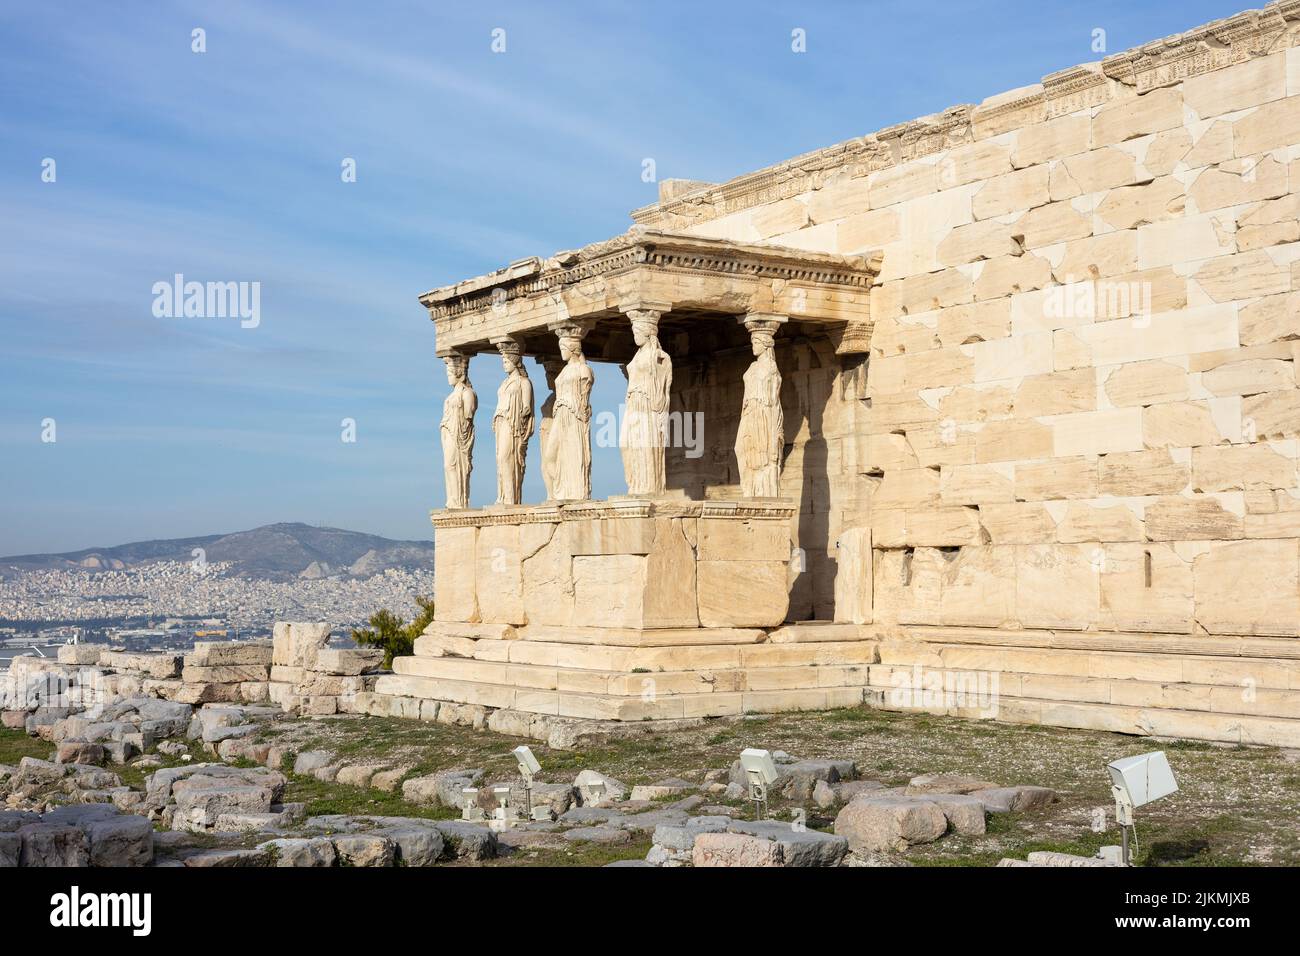 A scenic view of the Erechtheion building on the Acropolis in Athens, Greece Stock Photo